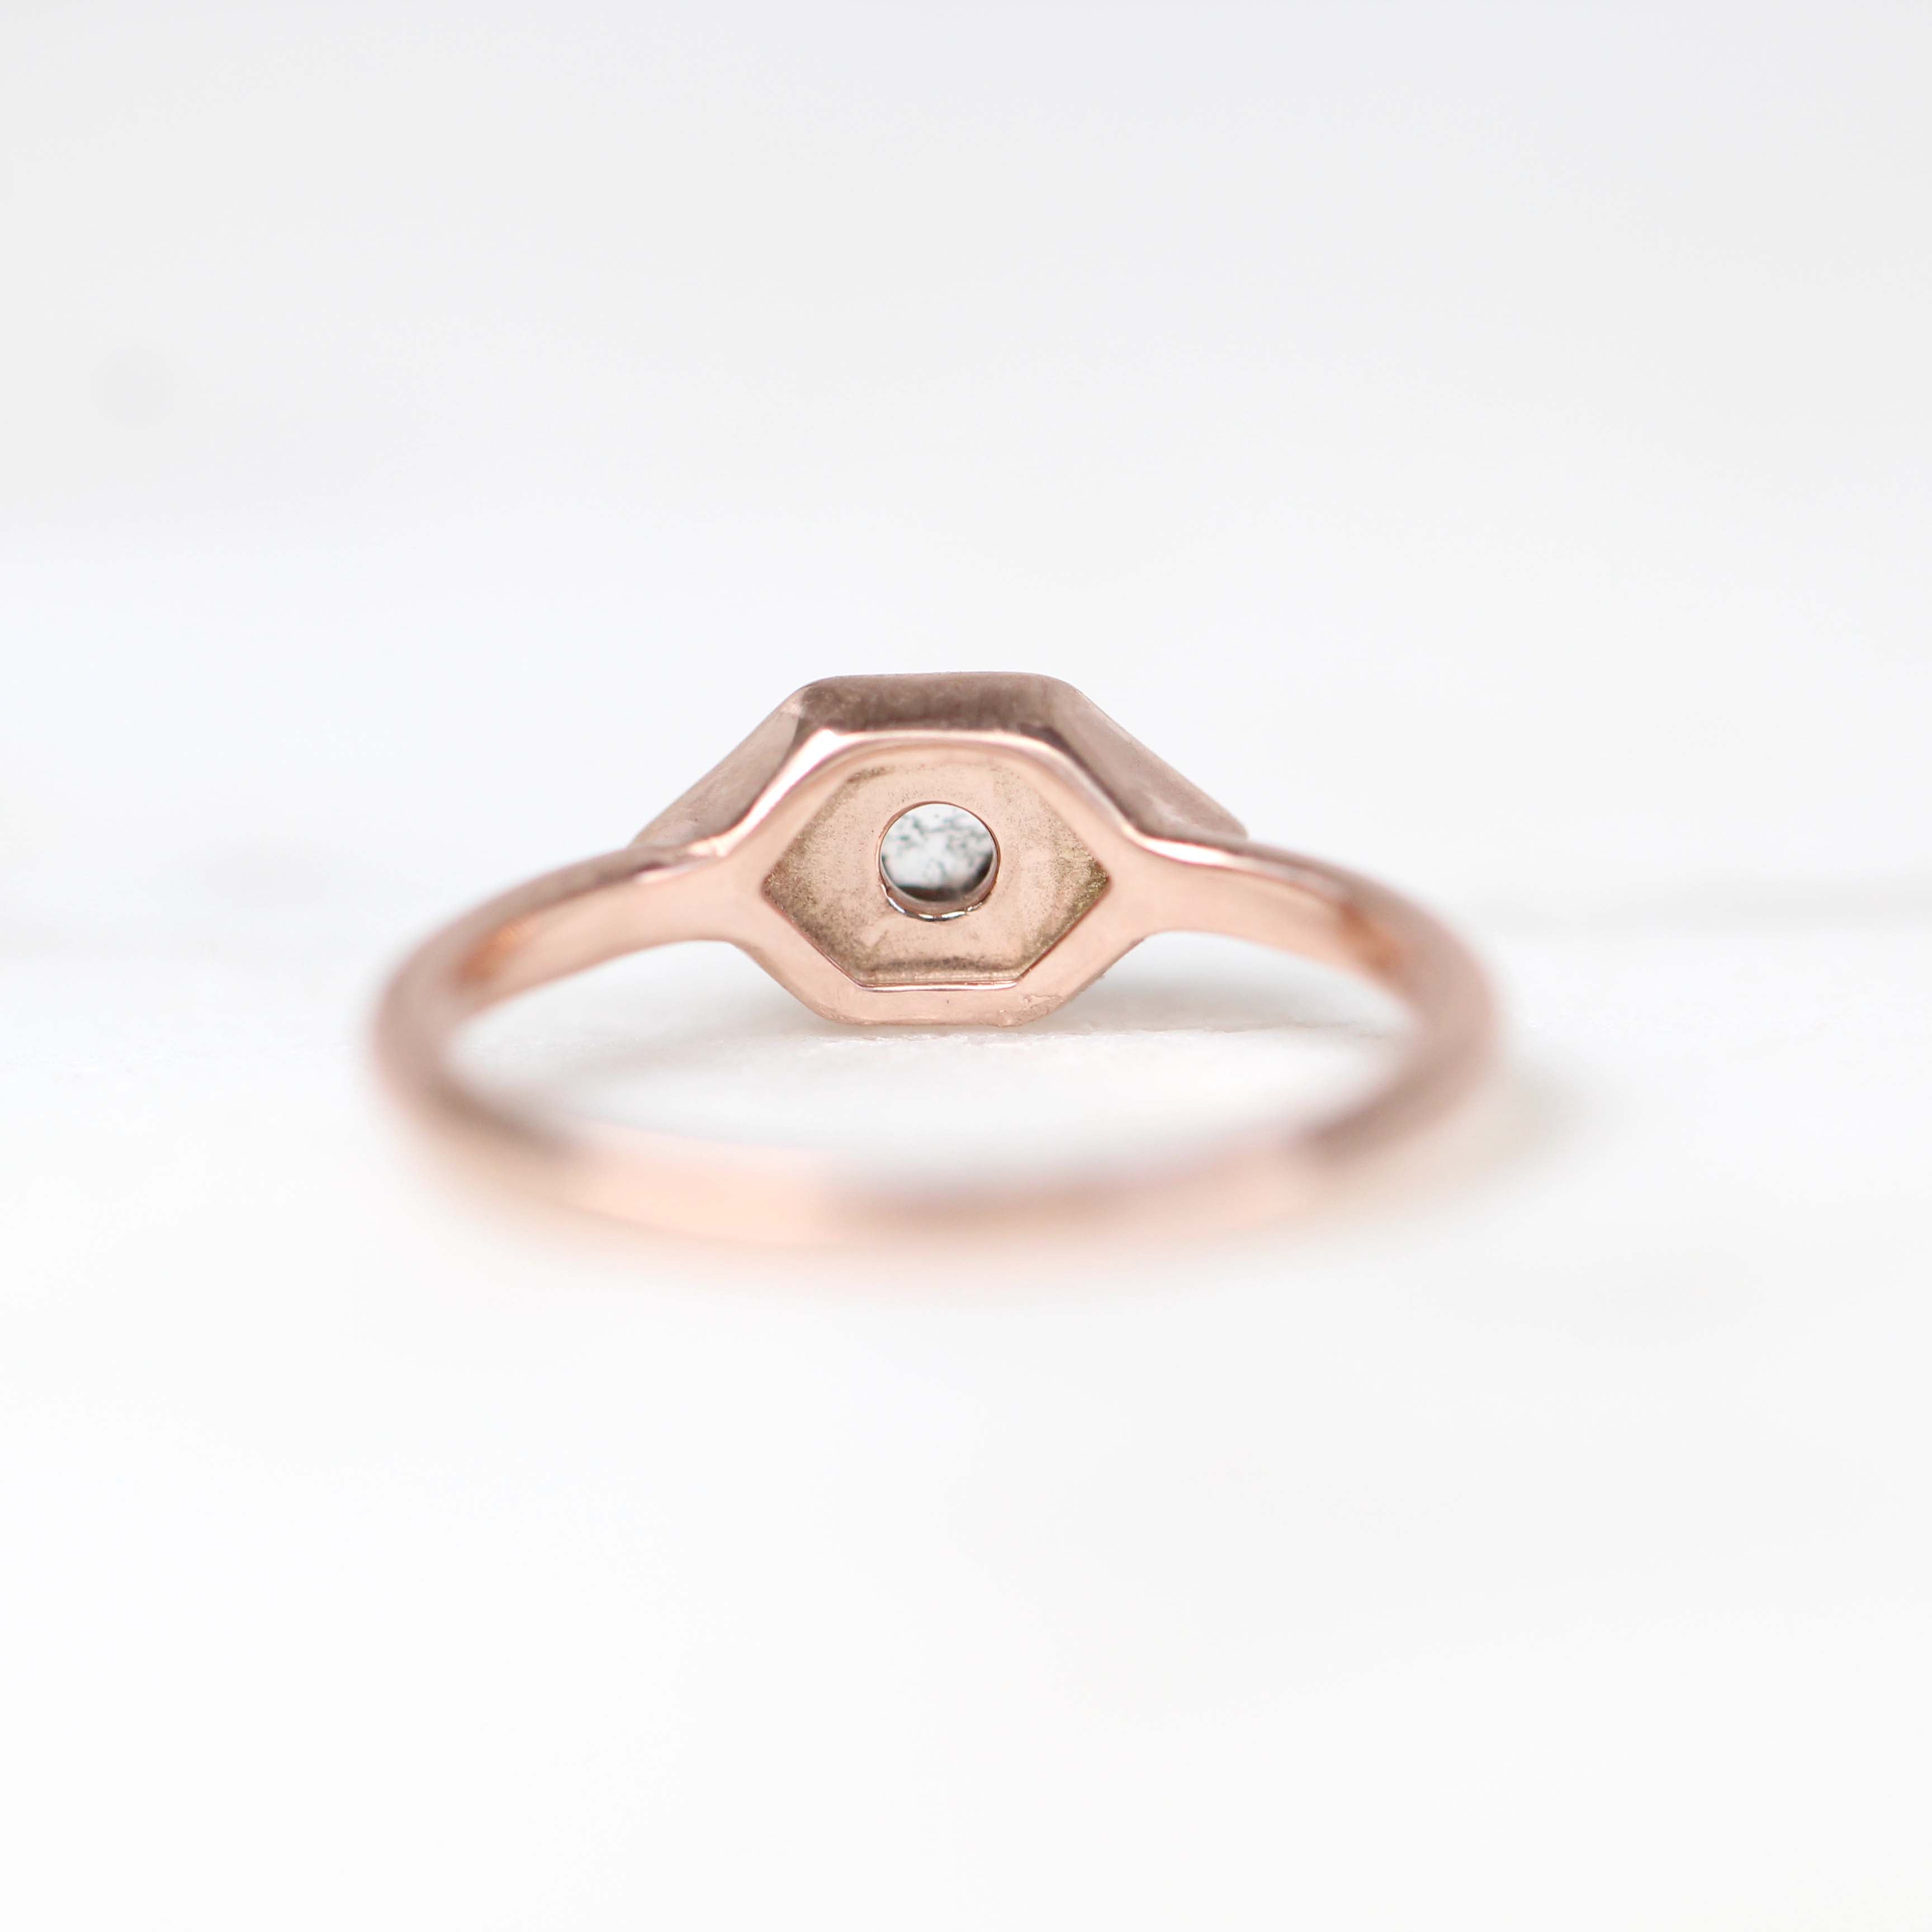 Melissa Ring with a 0.26 Carat Round Dark Celestial Diamond in 10k Rose Gold - Ready to Size and Ship - Midwinter Co. Alternative Bridal Rings and Modern Fine Jewelry